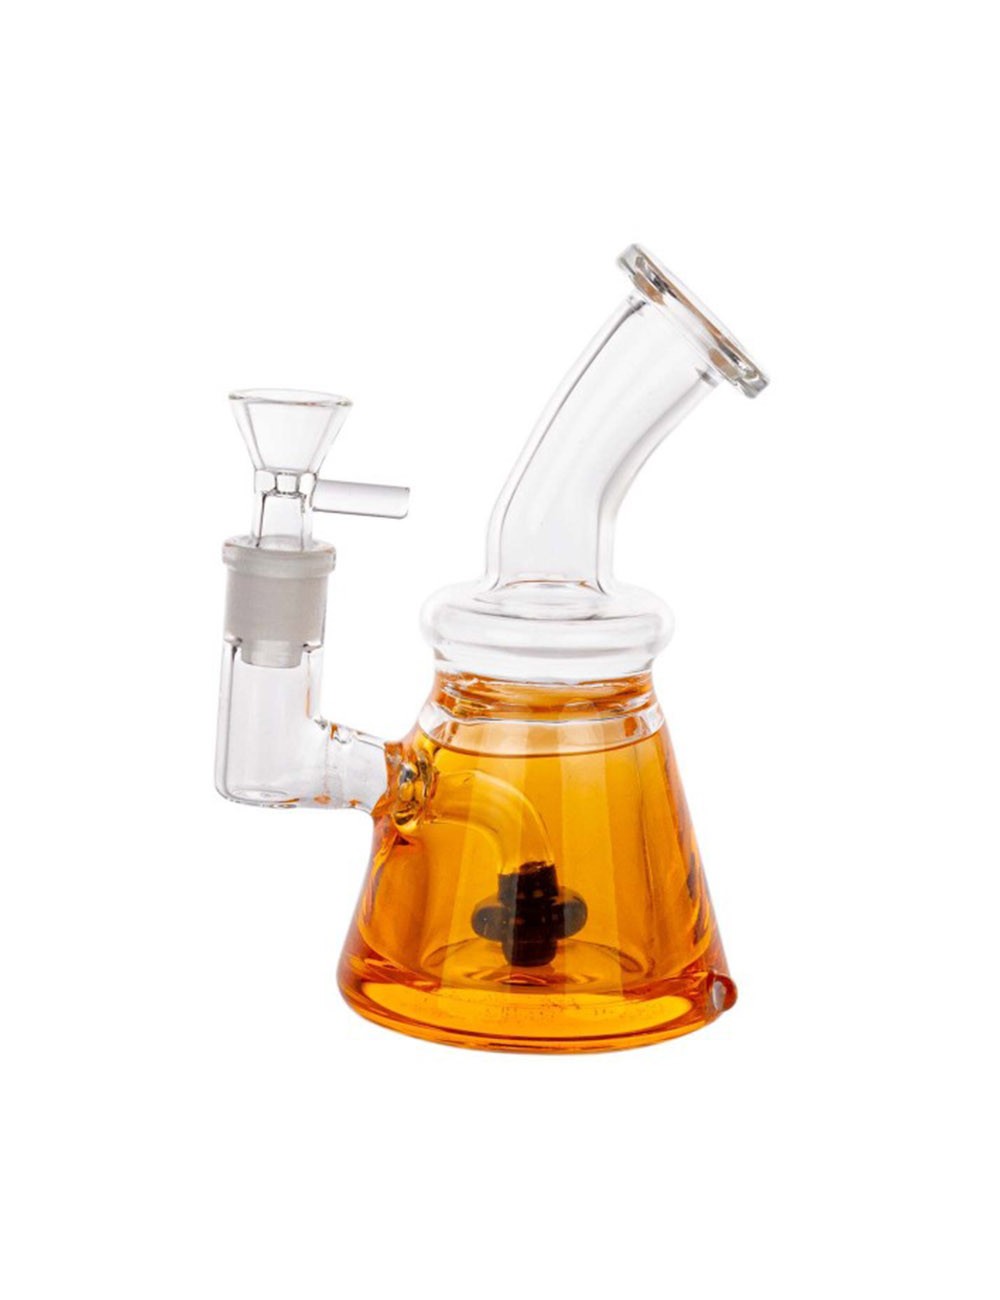 Bong Amsterdam | Limited Edition Bubbler Series - H:17cm - SG:14.5mm - 22mm base thickness